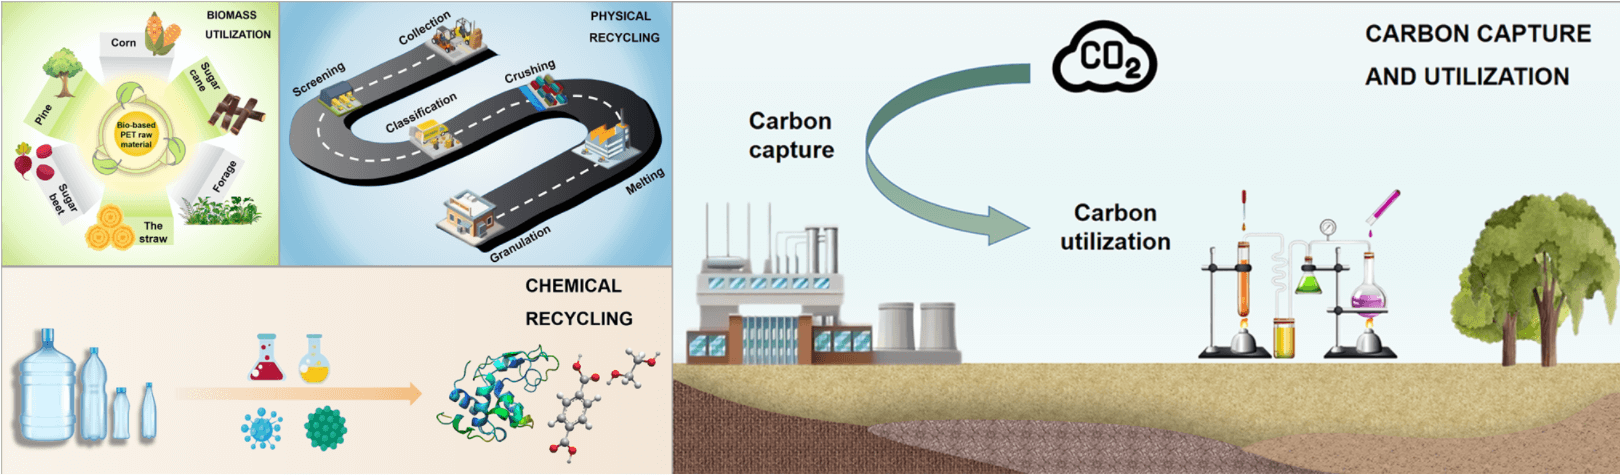 Recycling Carbon Resources from Waste PET to Reduce Carbon Dioxide Emission: Carbonization Technology Review and Perspective